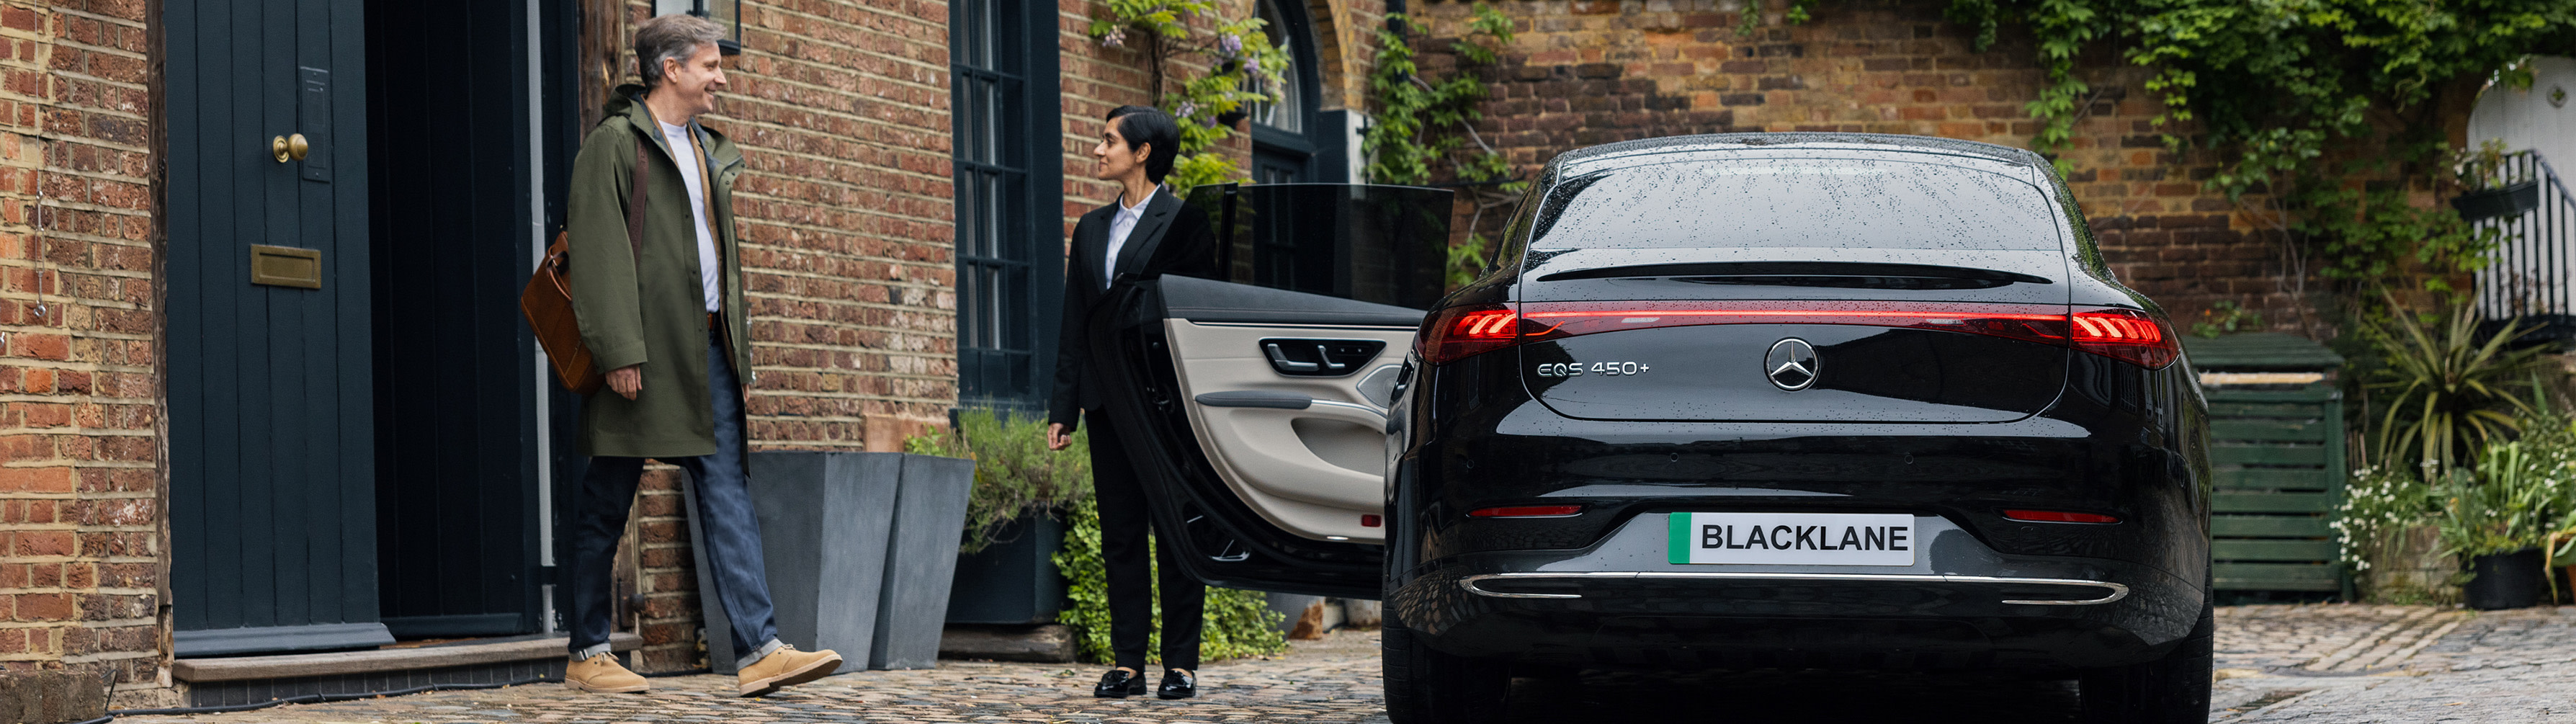 Blacklane chauffeur opening the door of a Mercedes EQS to let in a guest.